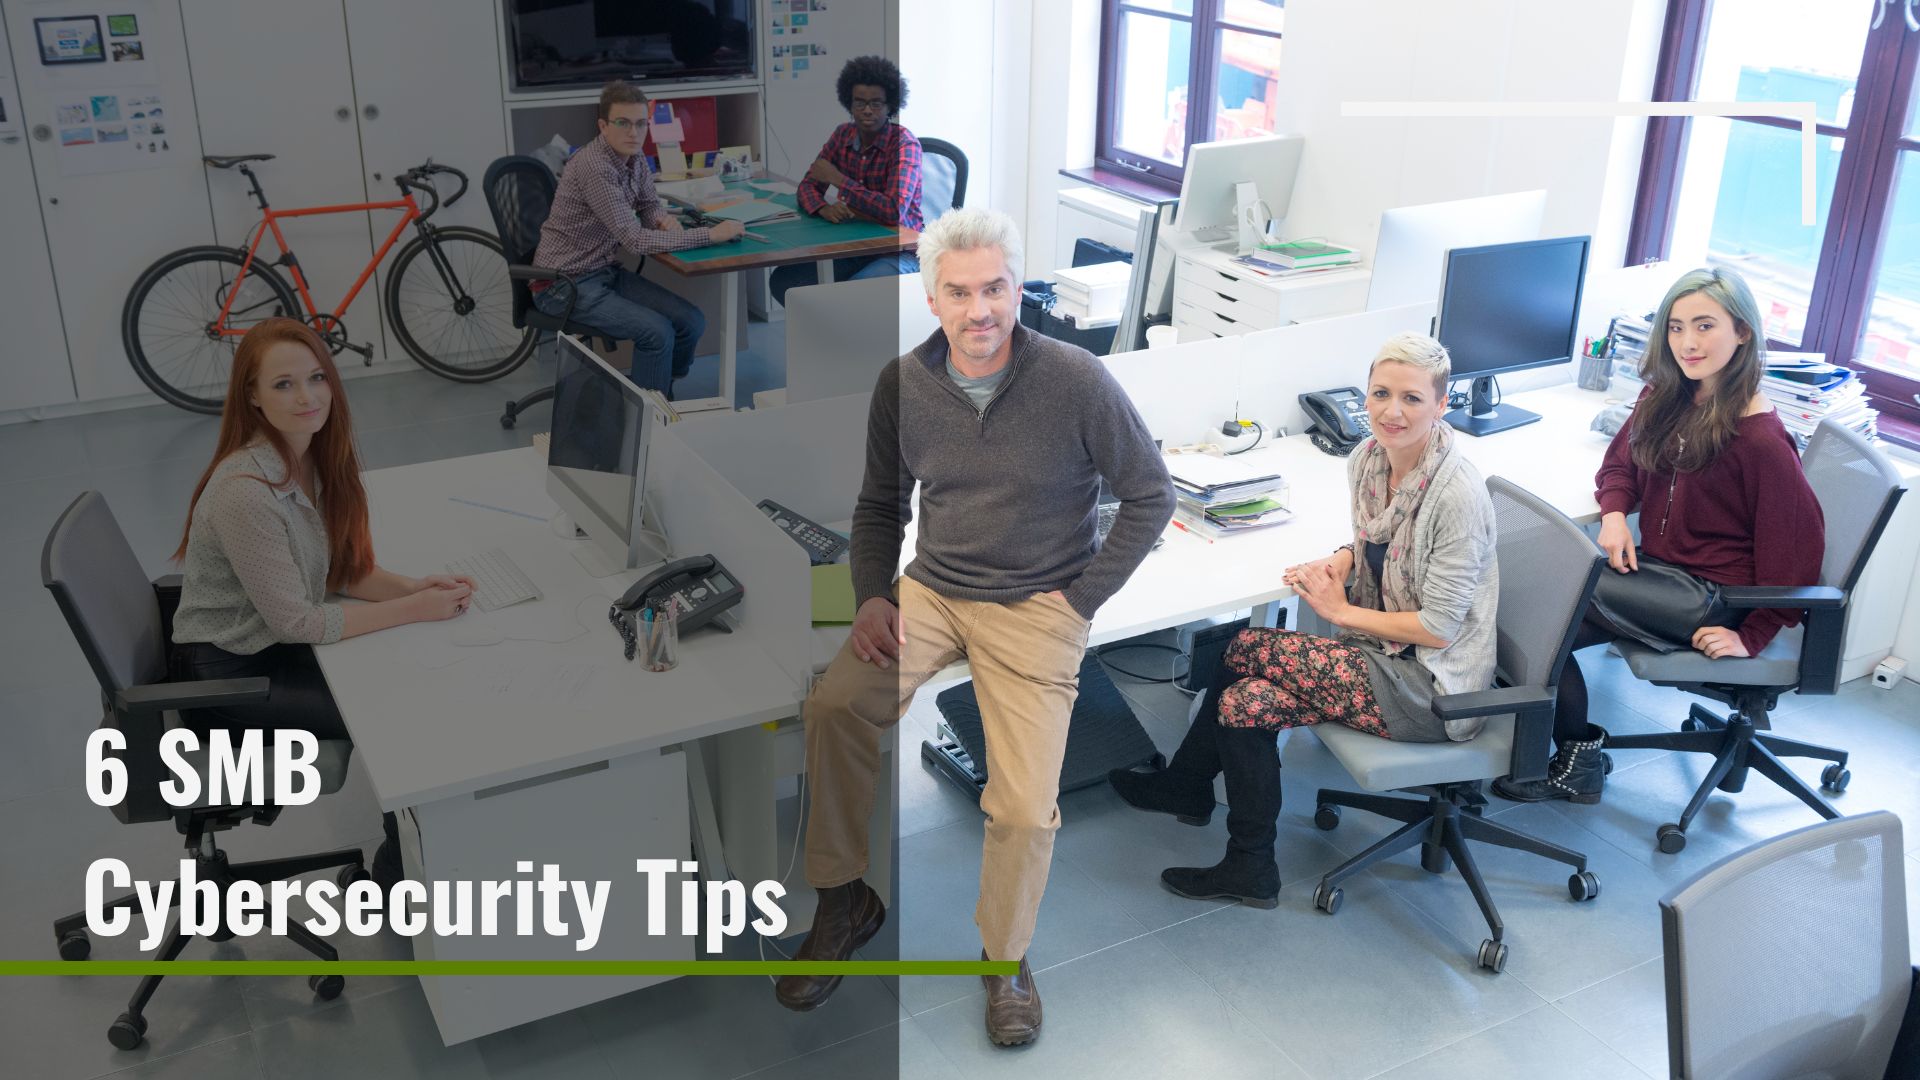 SMB Cybersecurity Tips from G6 IT